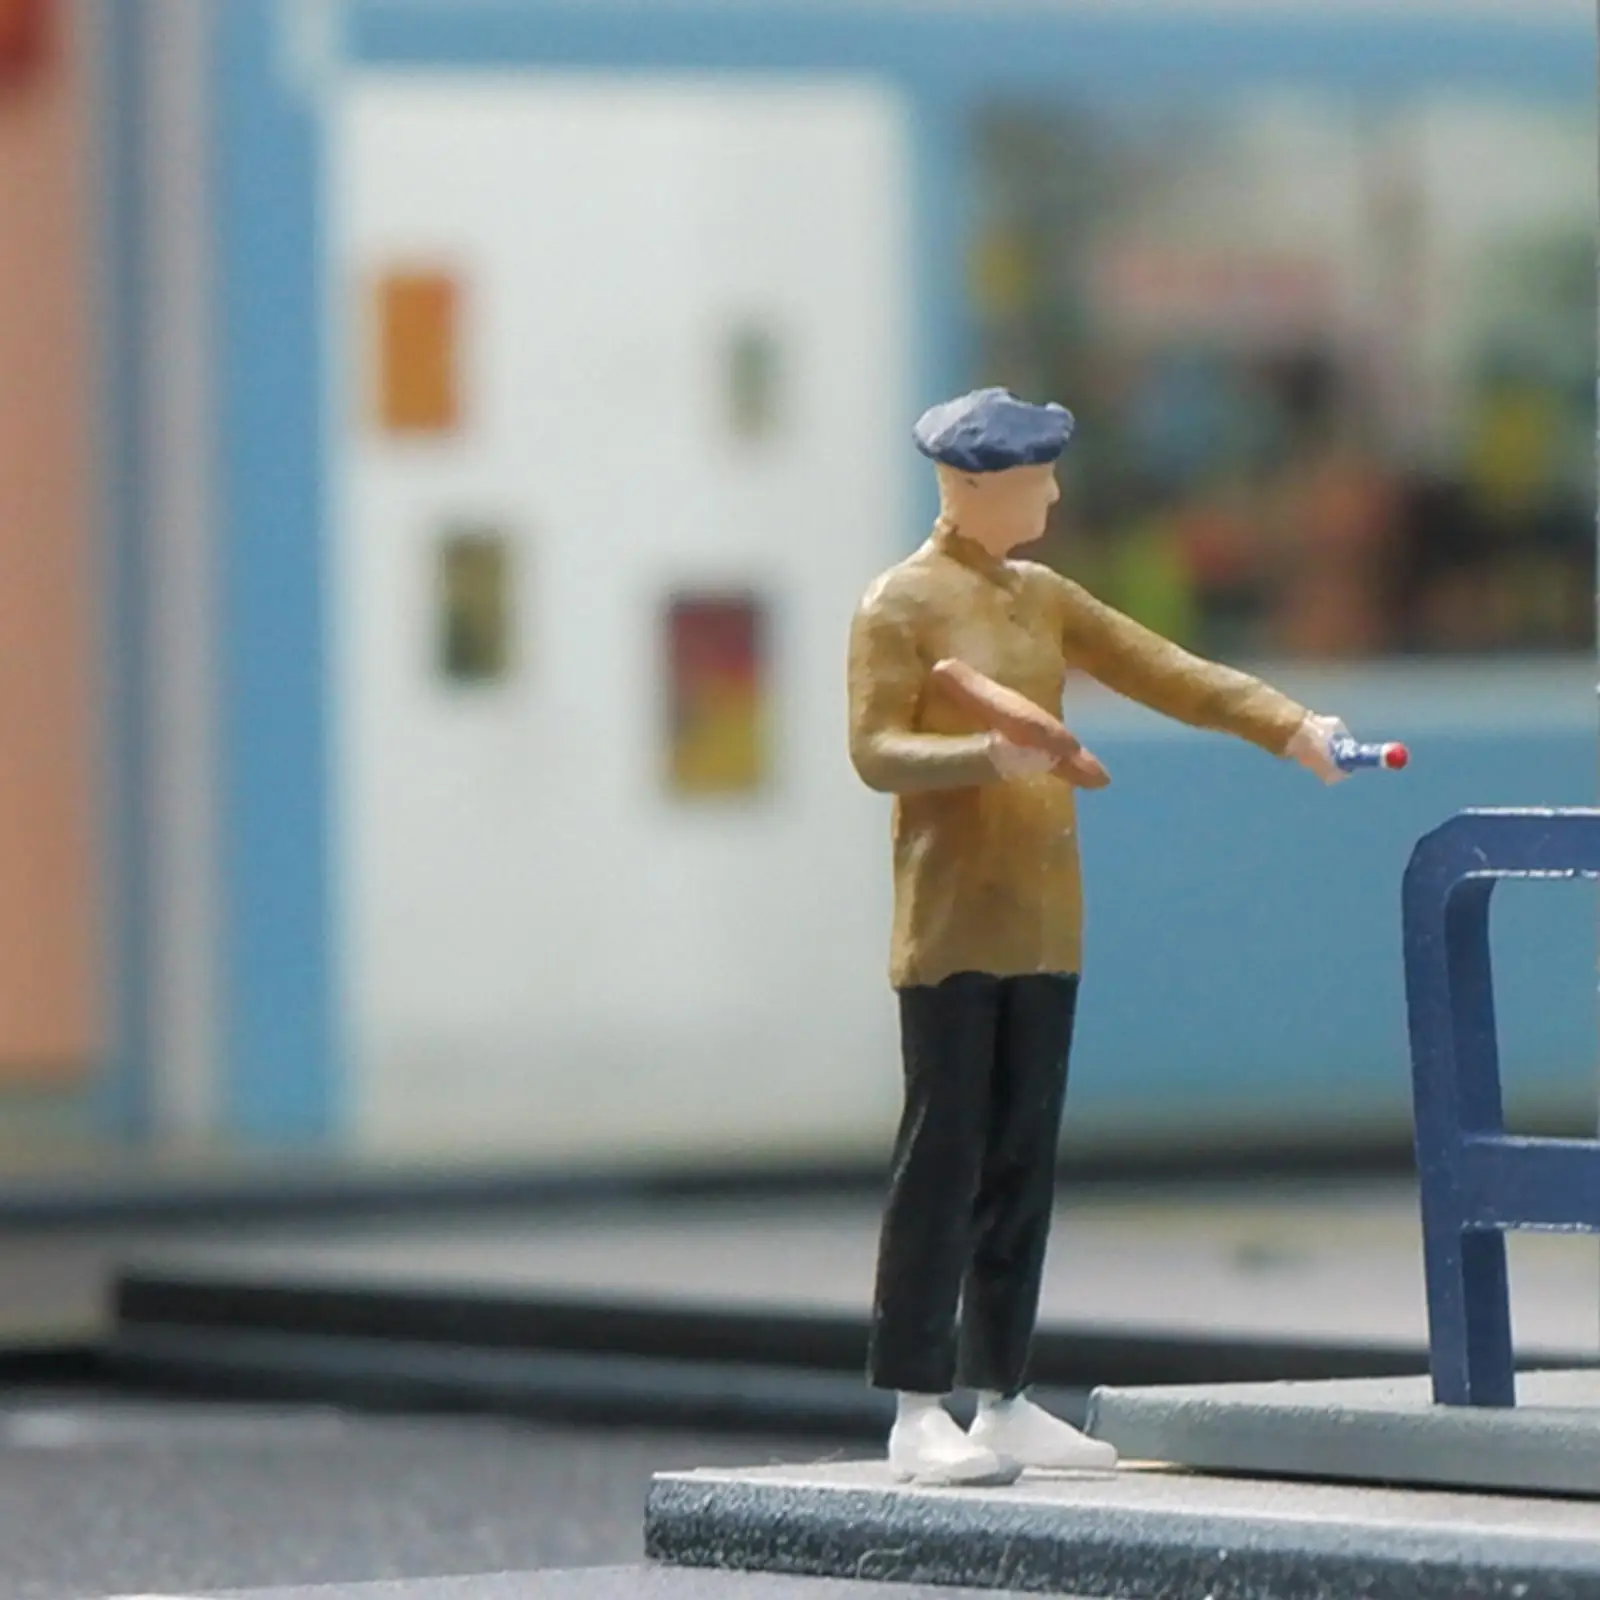 People Figurines for Architectural Building Diorama Train Station Layout